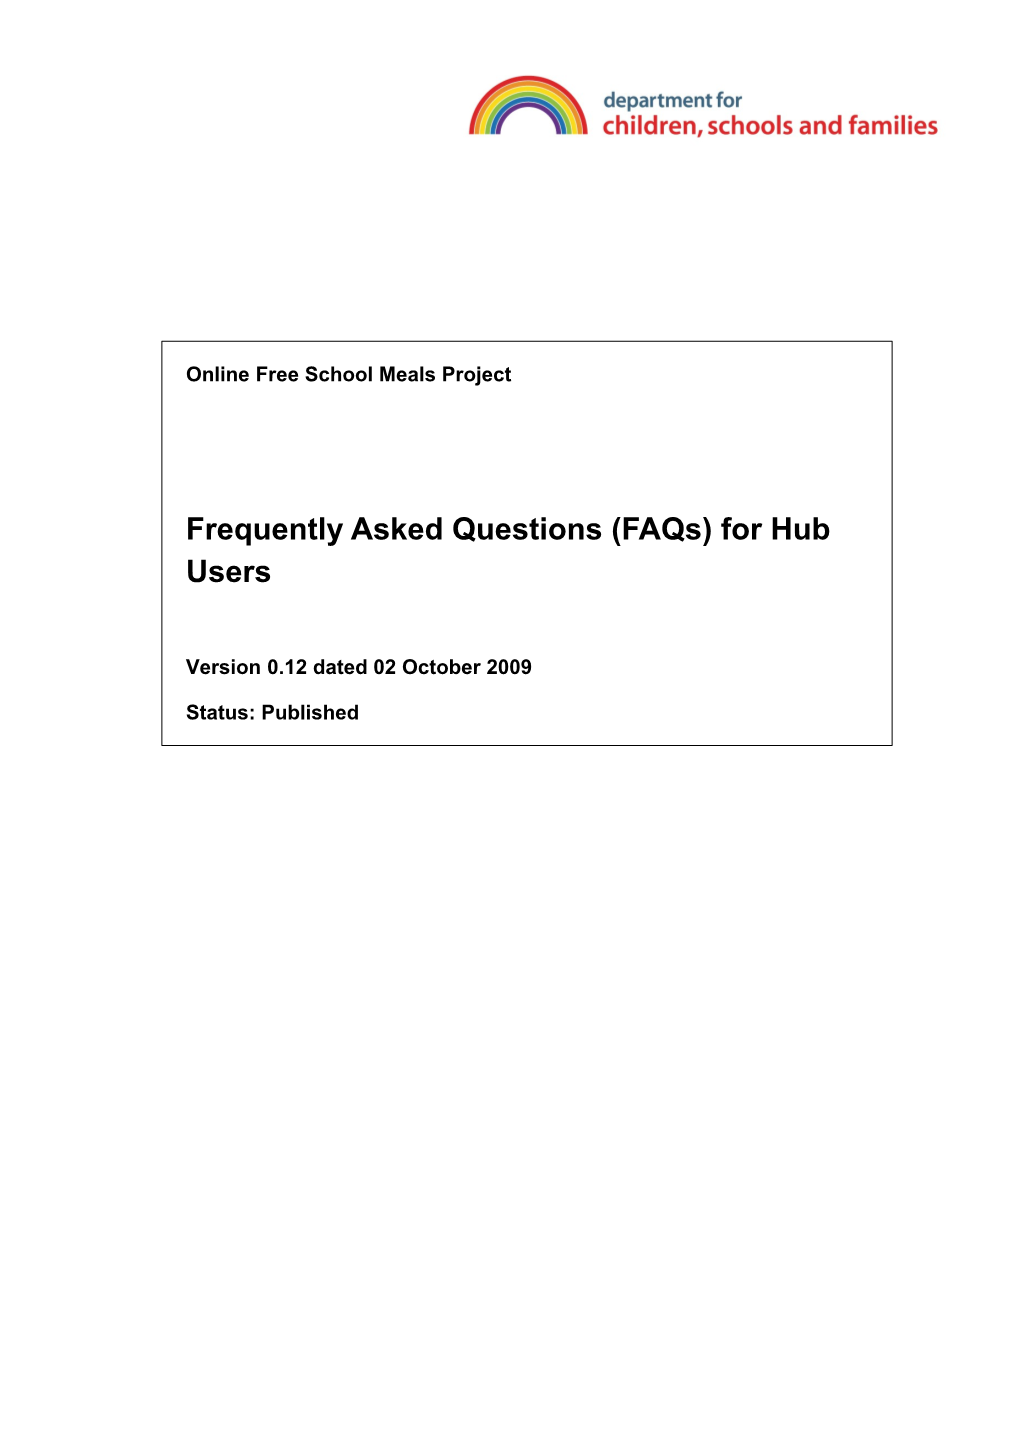 Frequently Asked Questions (Faqs) for Hub Users